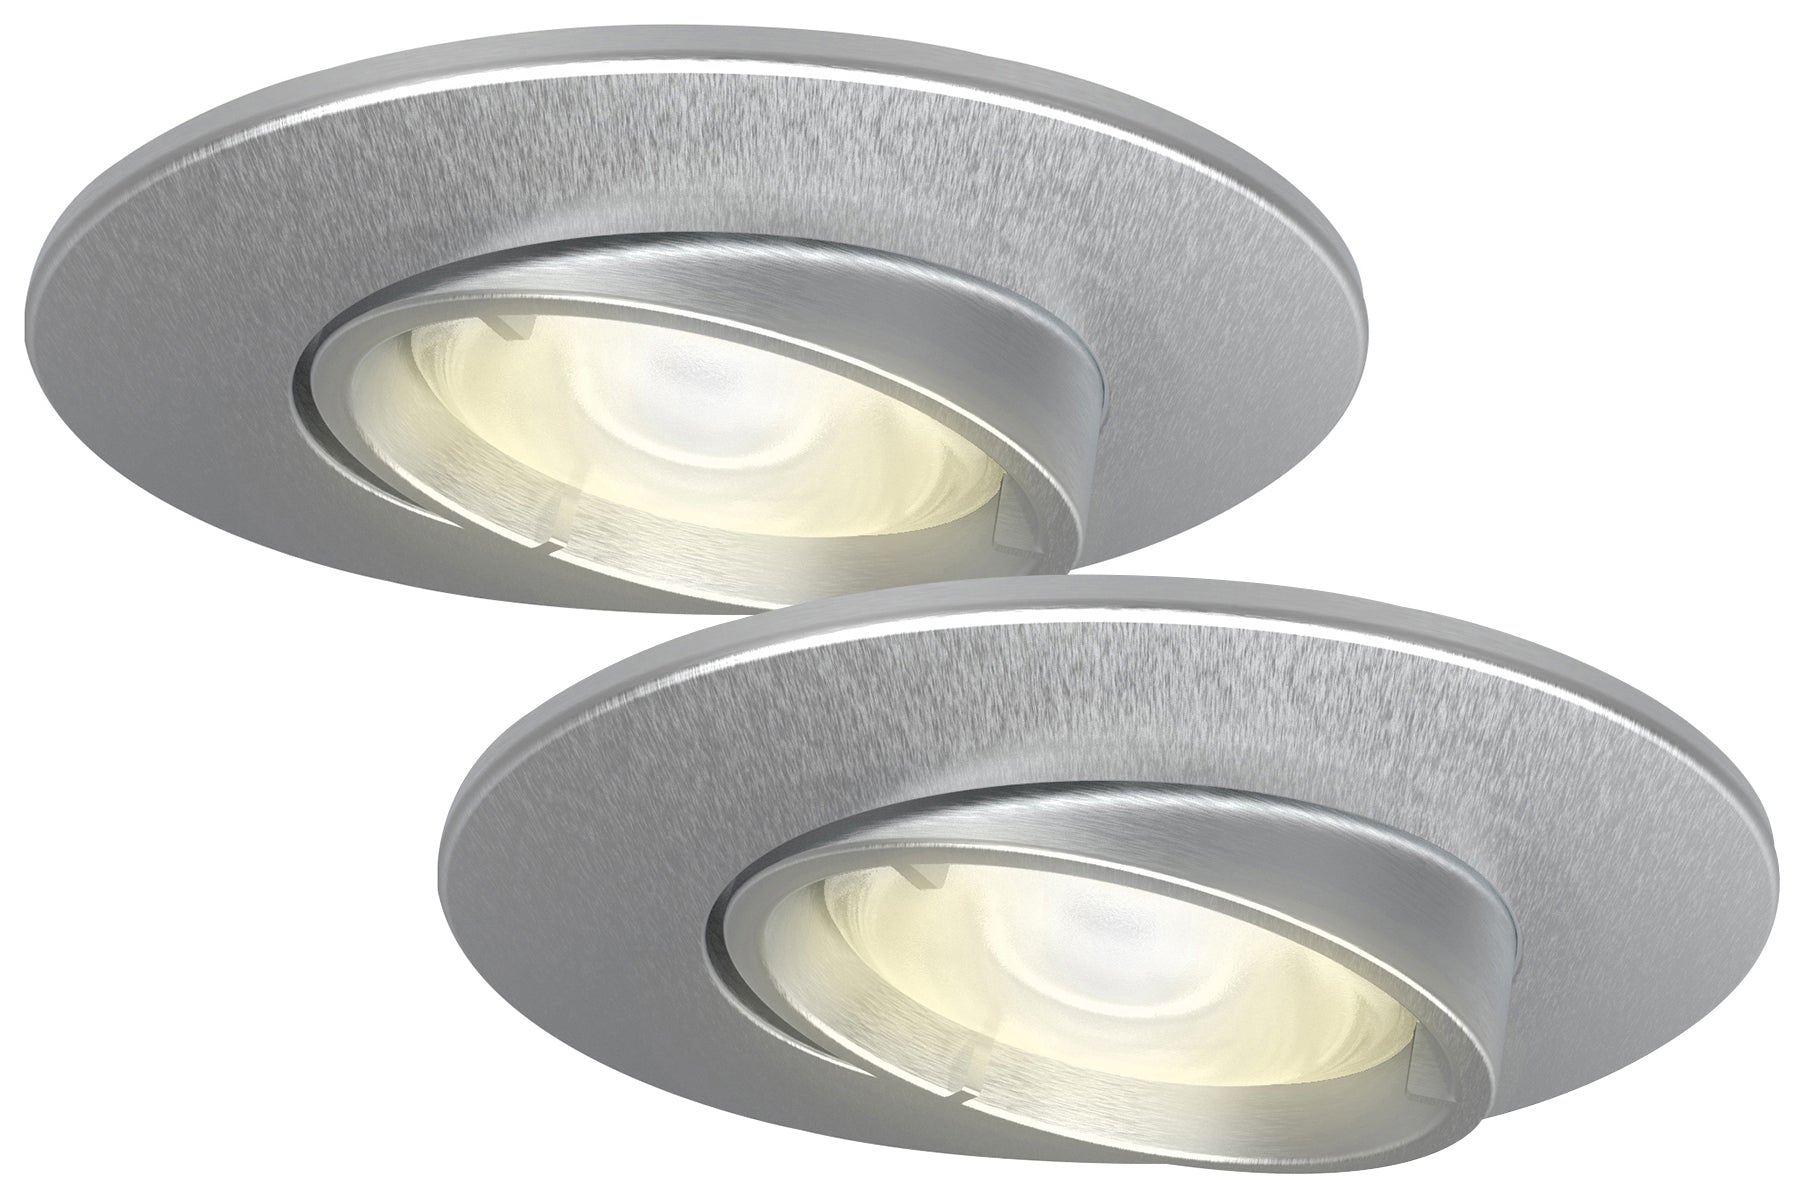 4lite WiZ Connected Fire-Rated IP20 GU10 Smart Adjustable LED Downlight - Satin Chrome (Pack of 2)